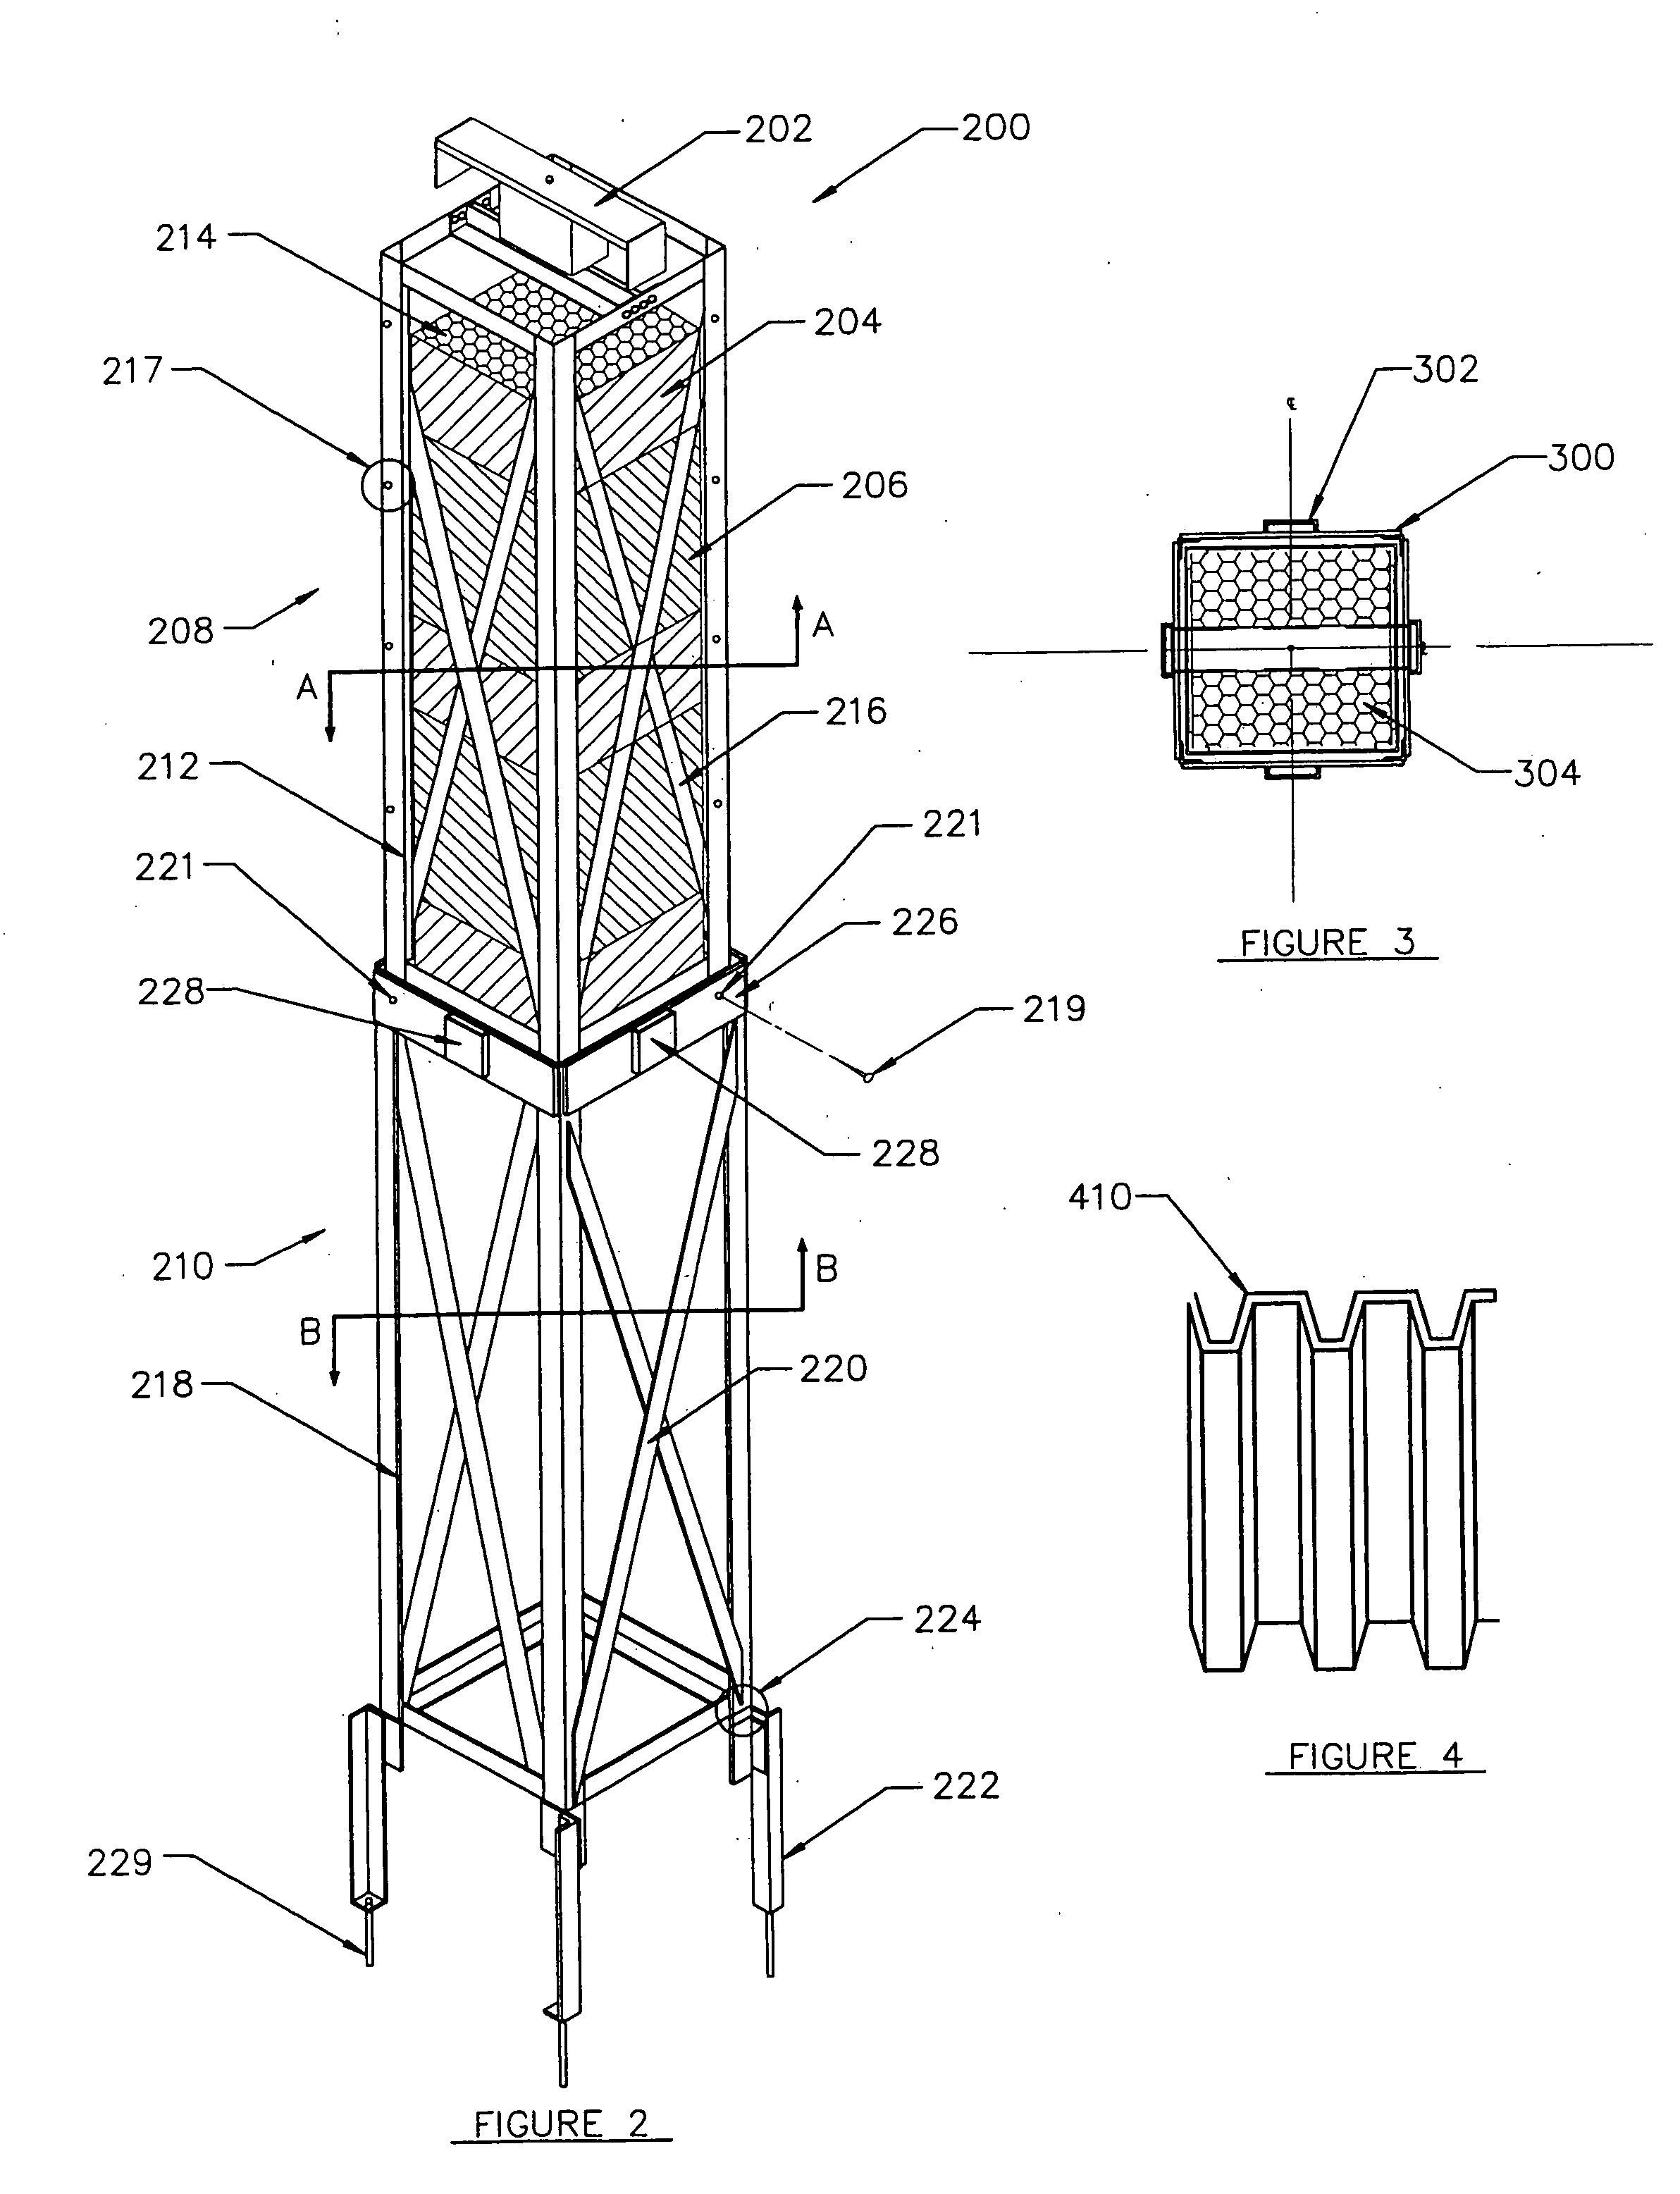 Method and apparatus for determining weight and biomass composition of a trickling filter